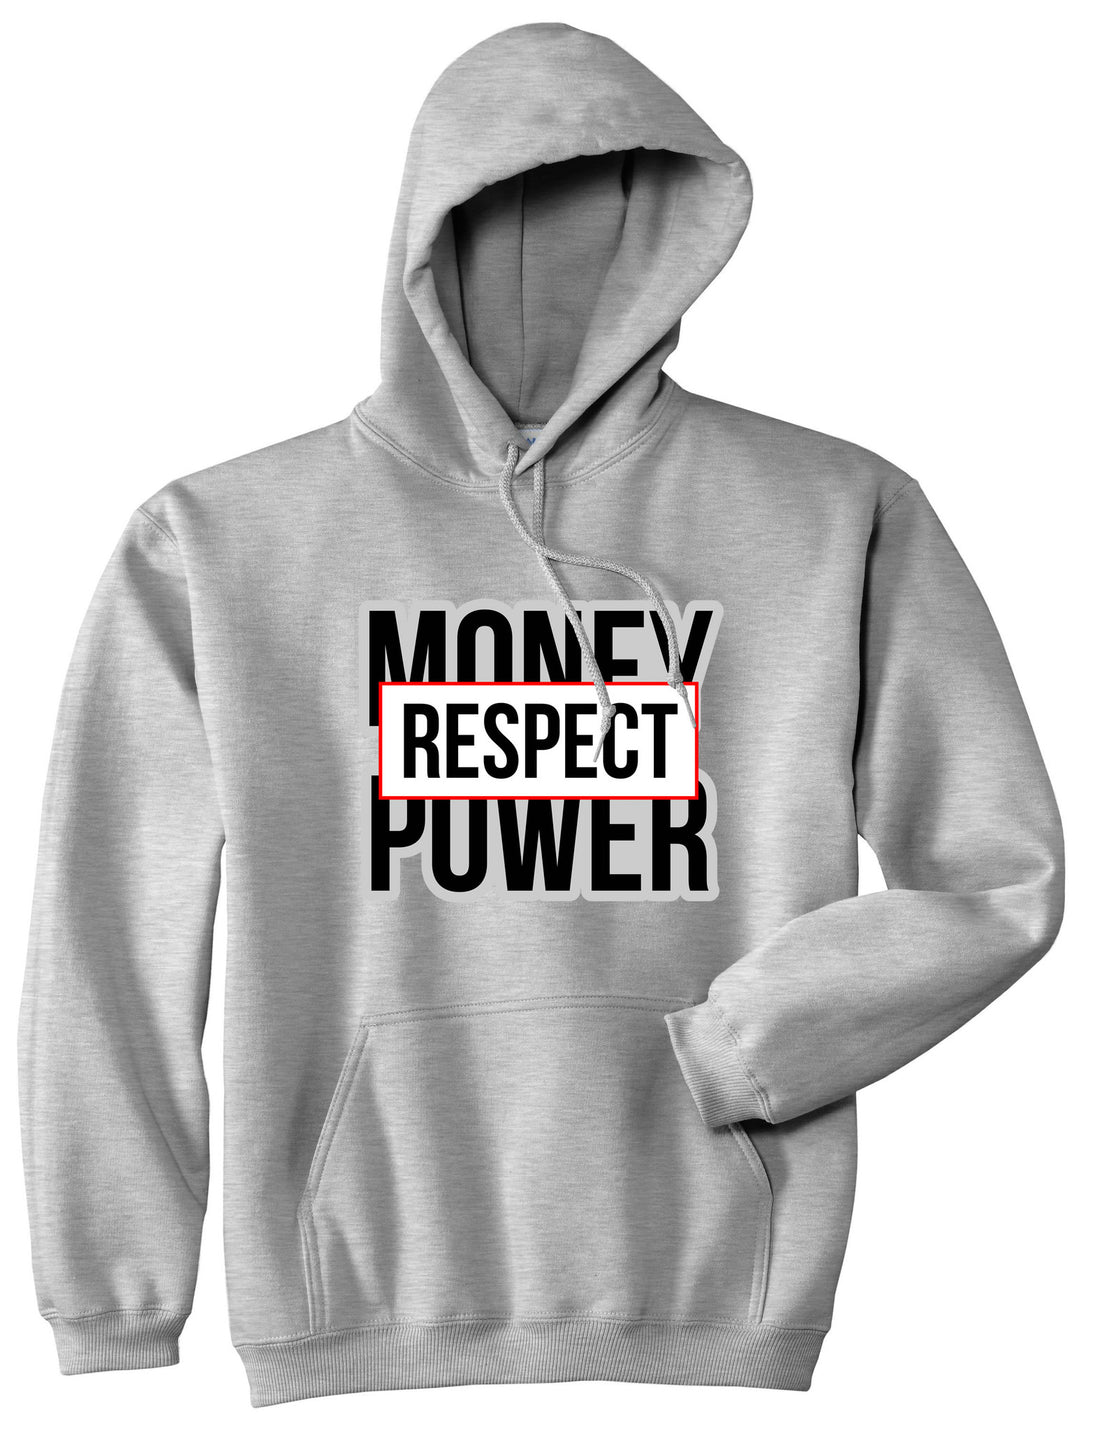 Money Power Respect Pullover Hoodie in Grey By Kings Of NY